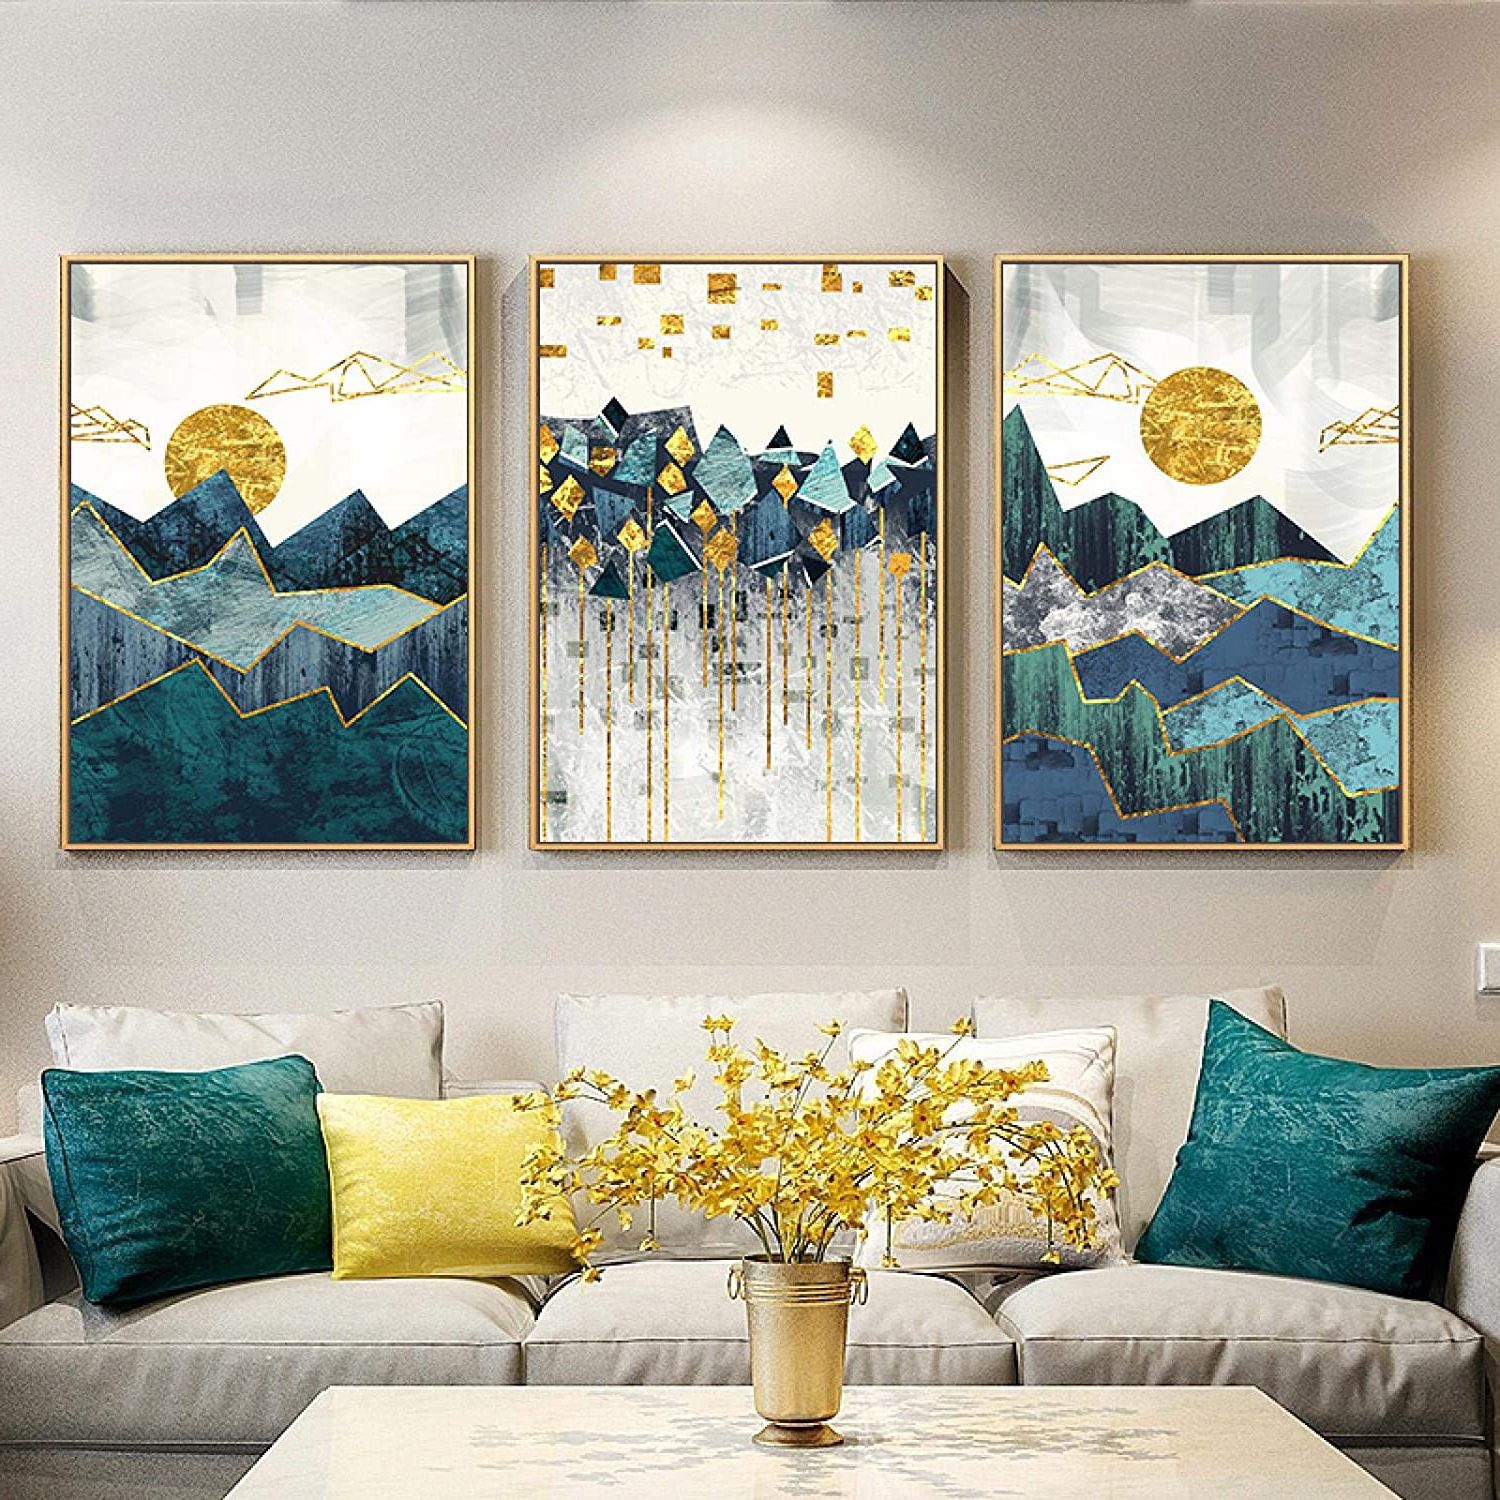 Poster Print Wall Art In Widely Used Canvas Wall Painting Art Abstract Geometric Mountain Landscape Wall Art  Canvas Painting Golden Sun Art Poster Print Wall Picture For Living Room  Unframed 3 Piece Set 50 * 70cm : Amazon.co.uk: Home (Photo 2 of 15)